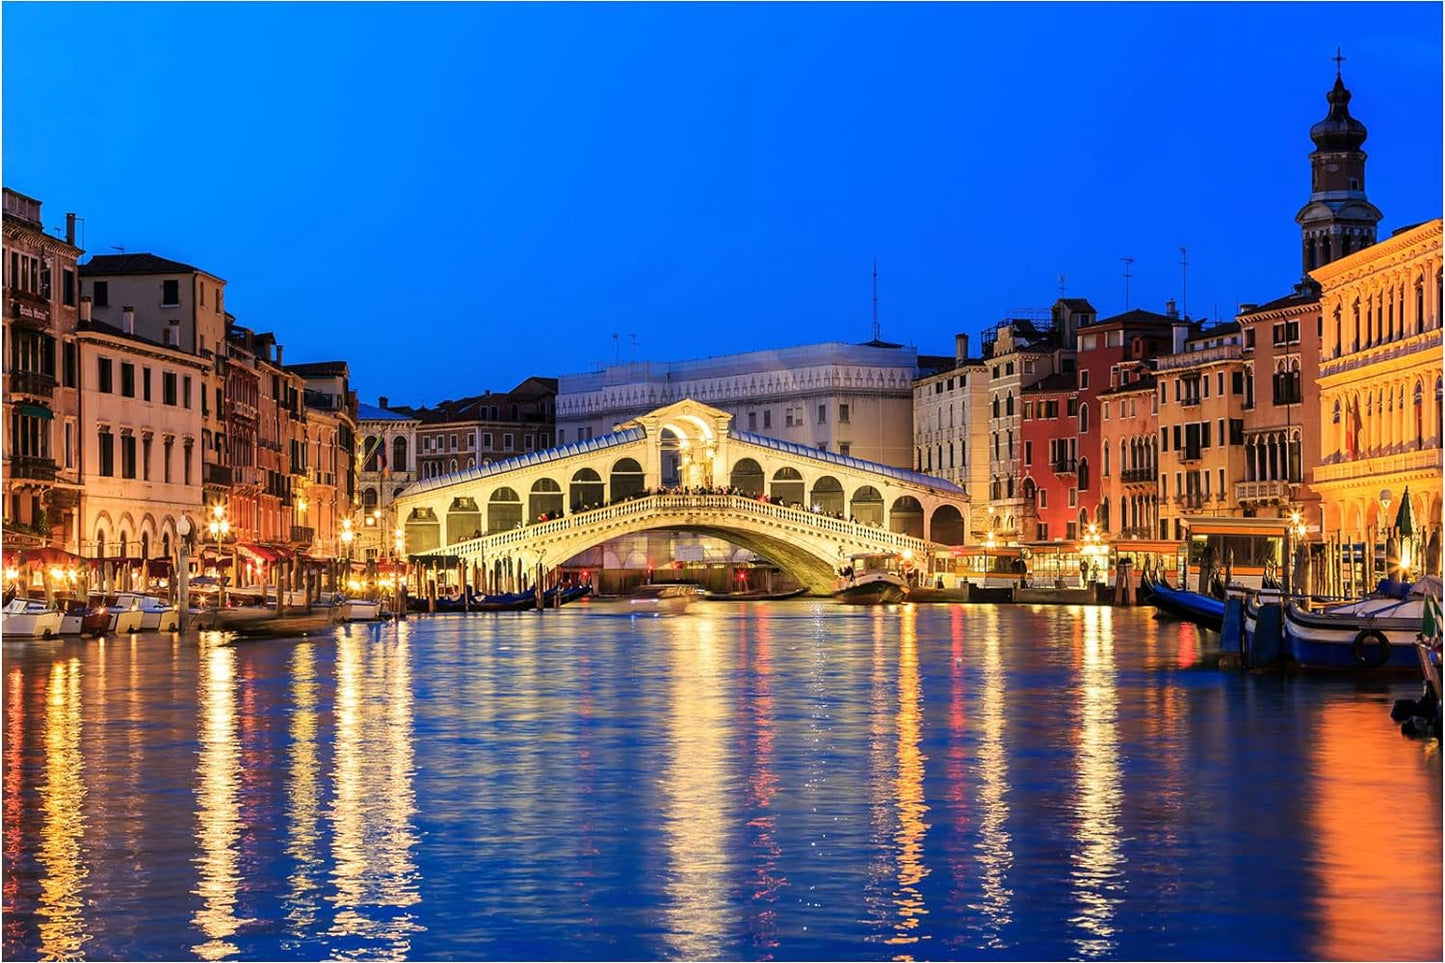 Jigsaw Puzzles 1000 Pieces for Adults Venice by Night 1000 Piece Puzzle Venice in Night Fell Puzzle 1000 Pieces Venice Bridge Puzzles Venice Landscape Jigsaw Puzzles for Adults Teens